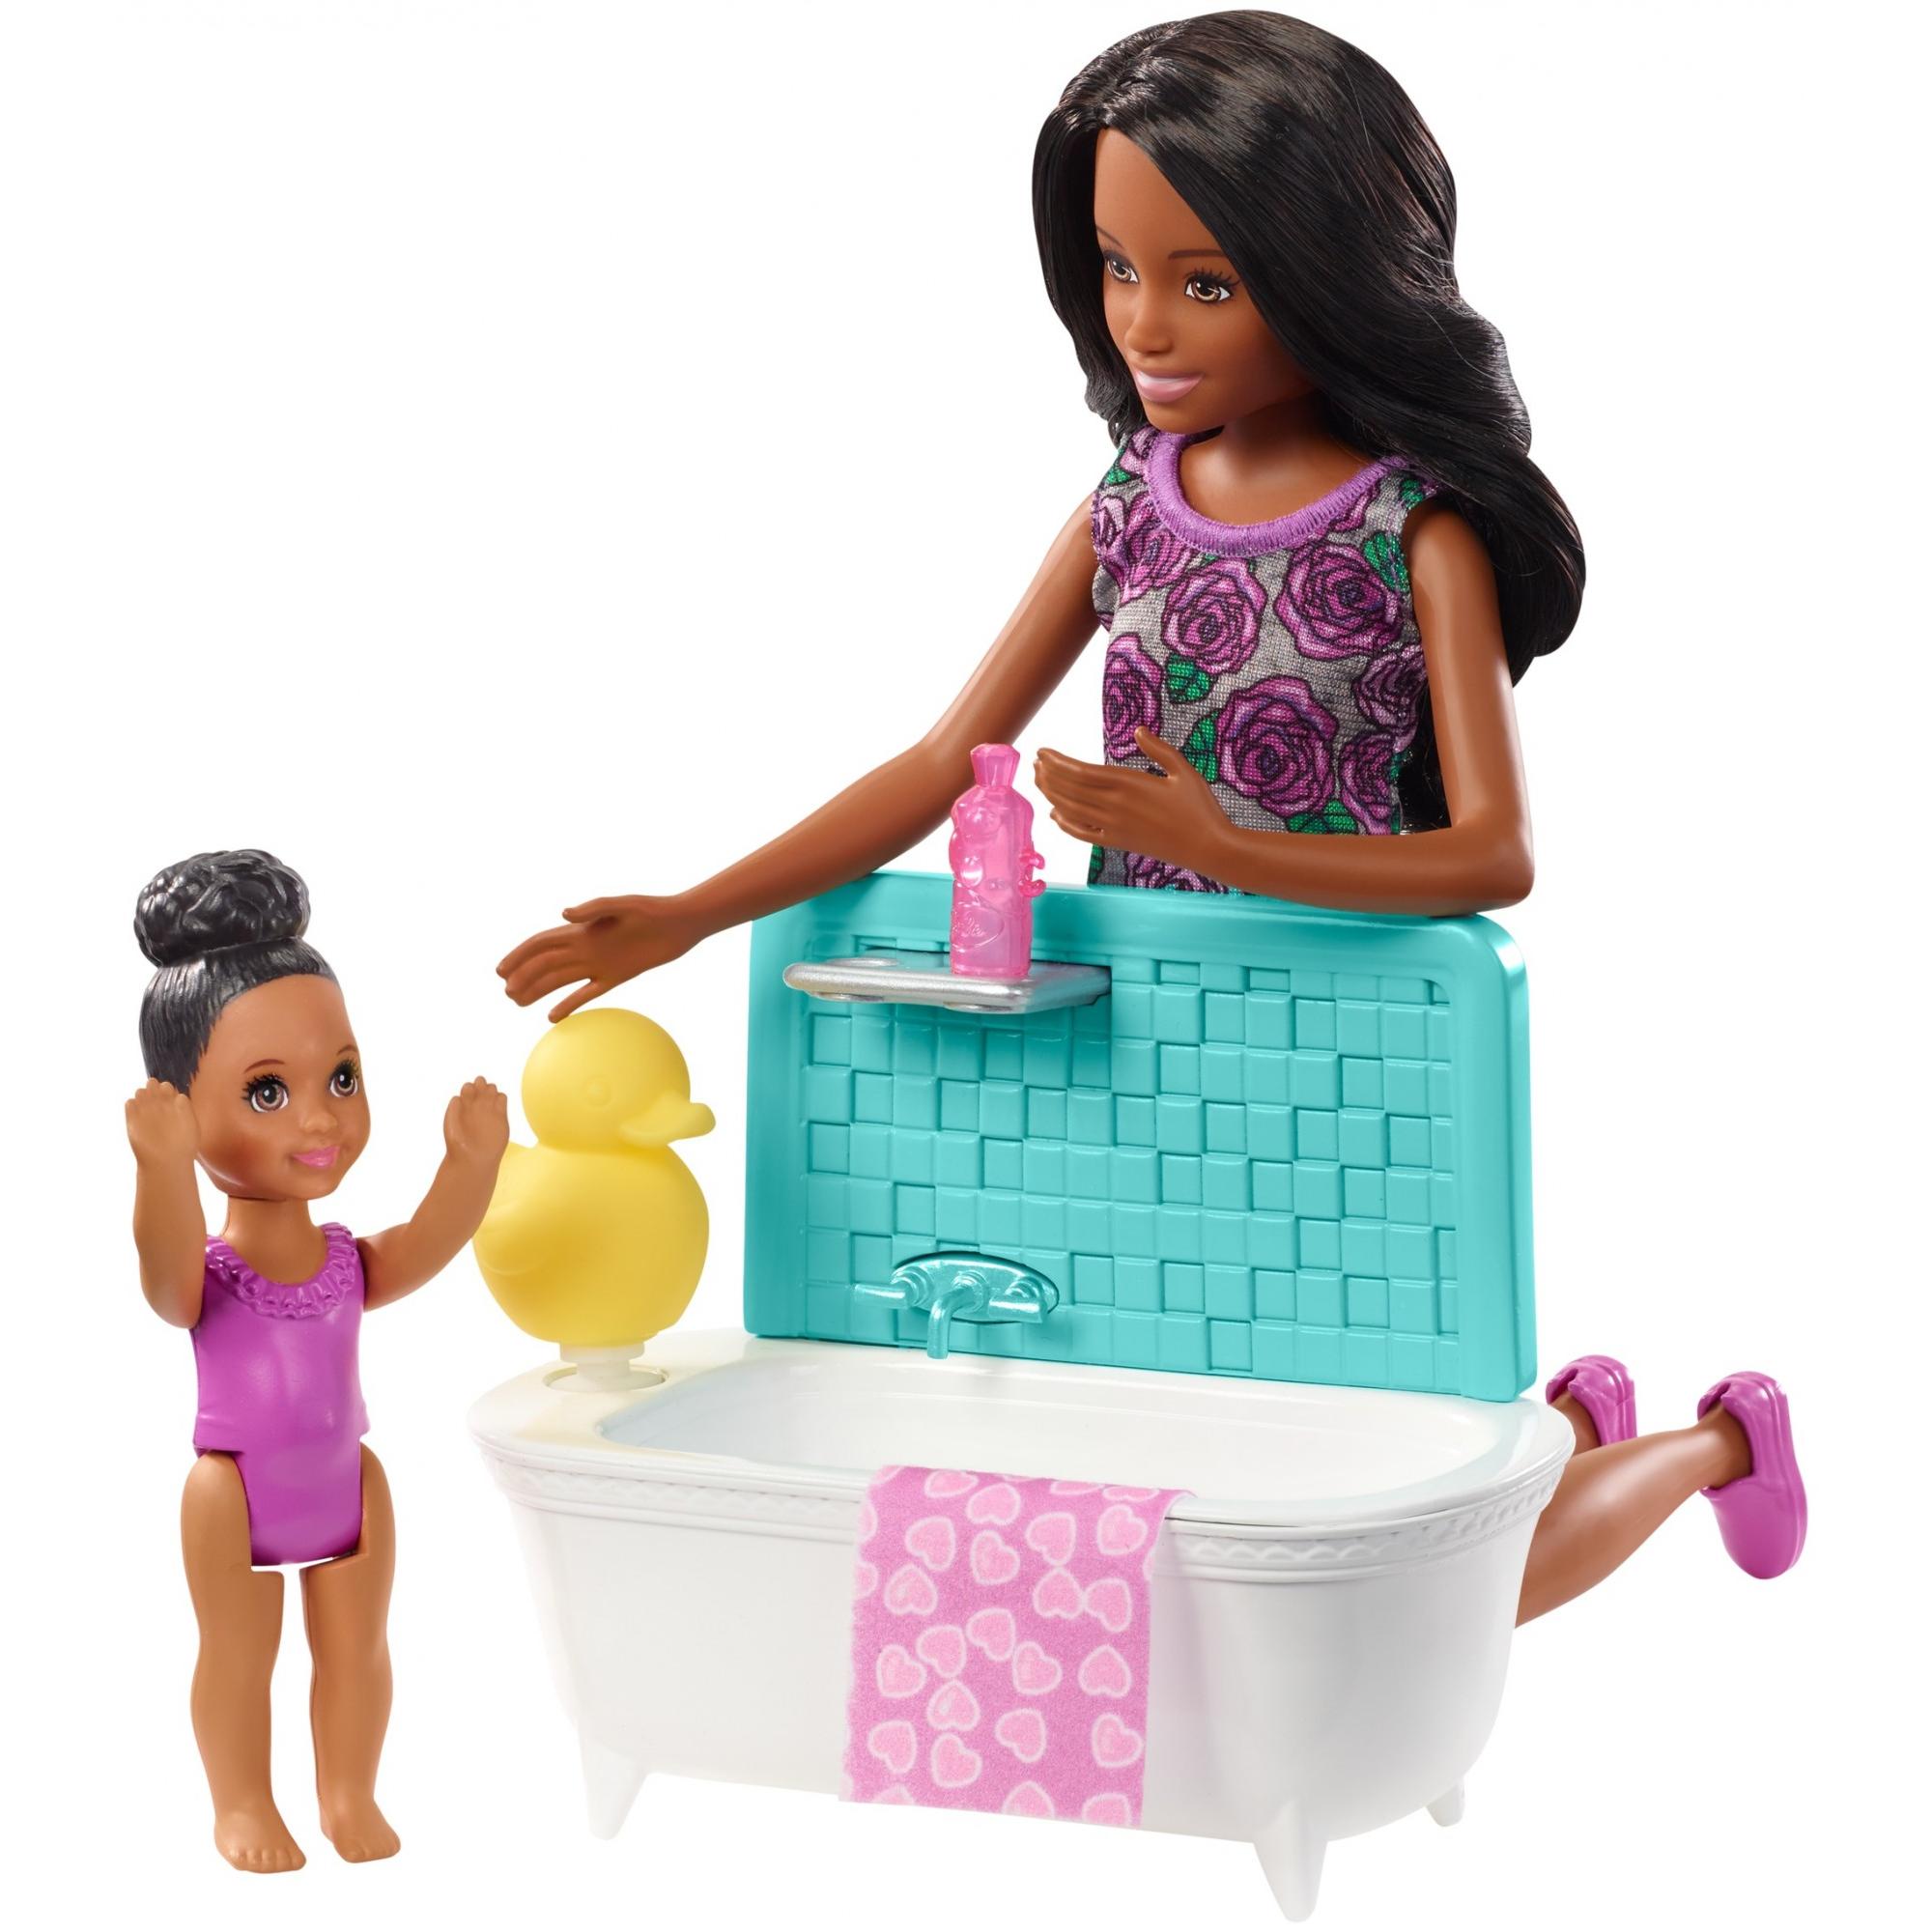 Barbie Skipper Babysitters Inc. Bath Time Playset with Toddler Doll - image 4 of 8